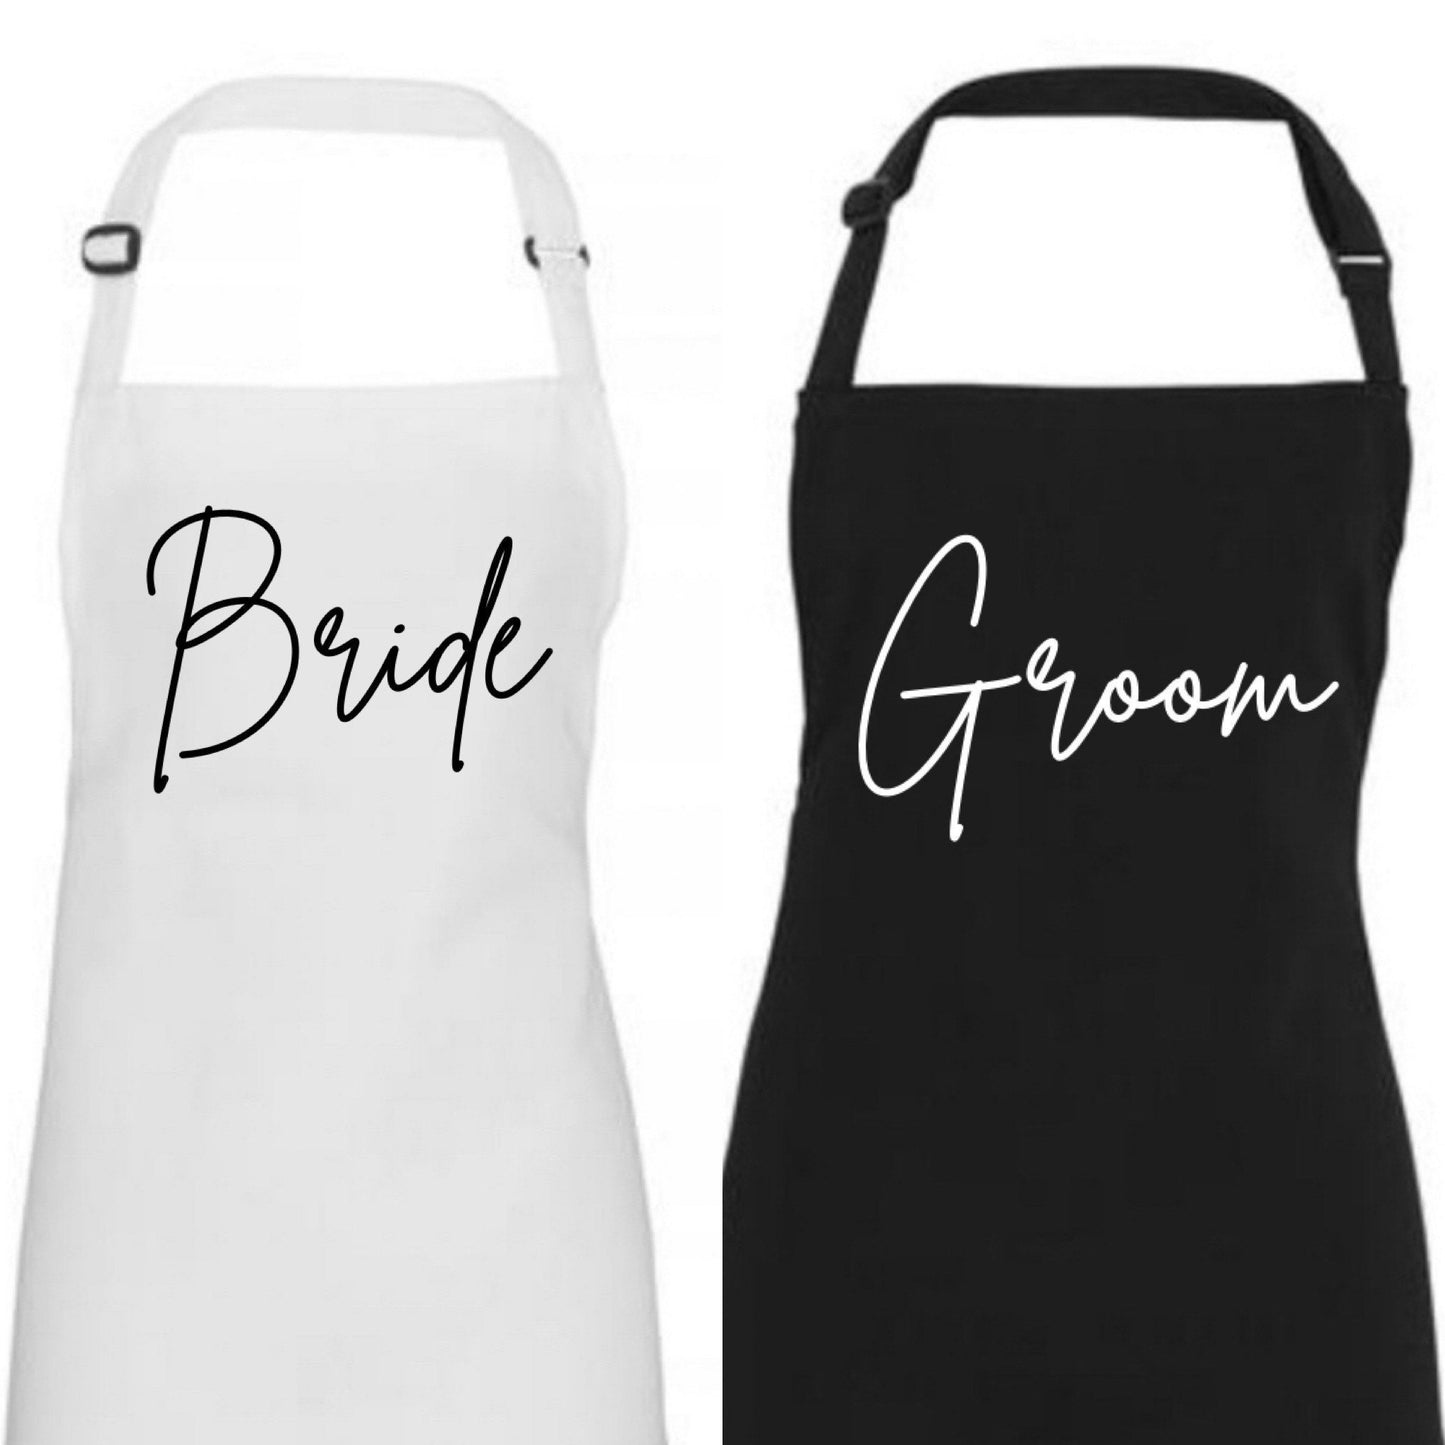 Wedding day apron, Bride and Groom apron set, wedding dress cover up for first dinner as mr and Mrs, groom suit cover up, black and white